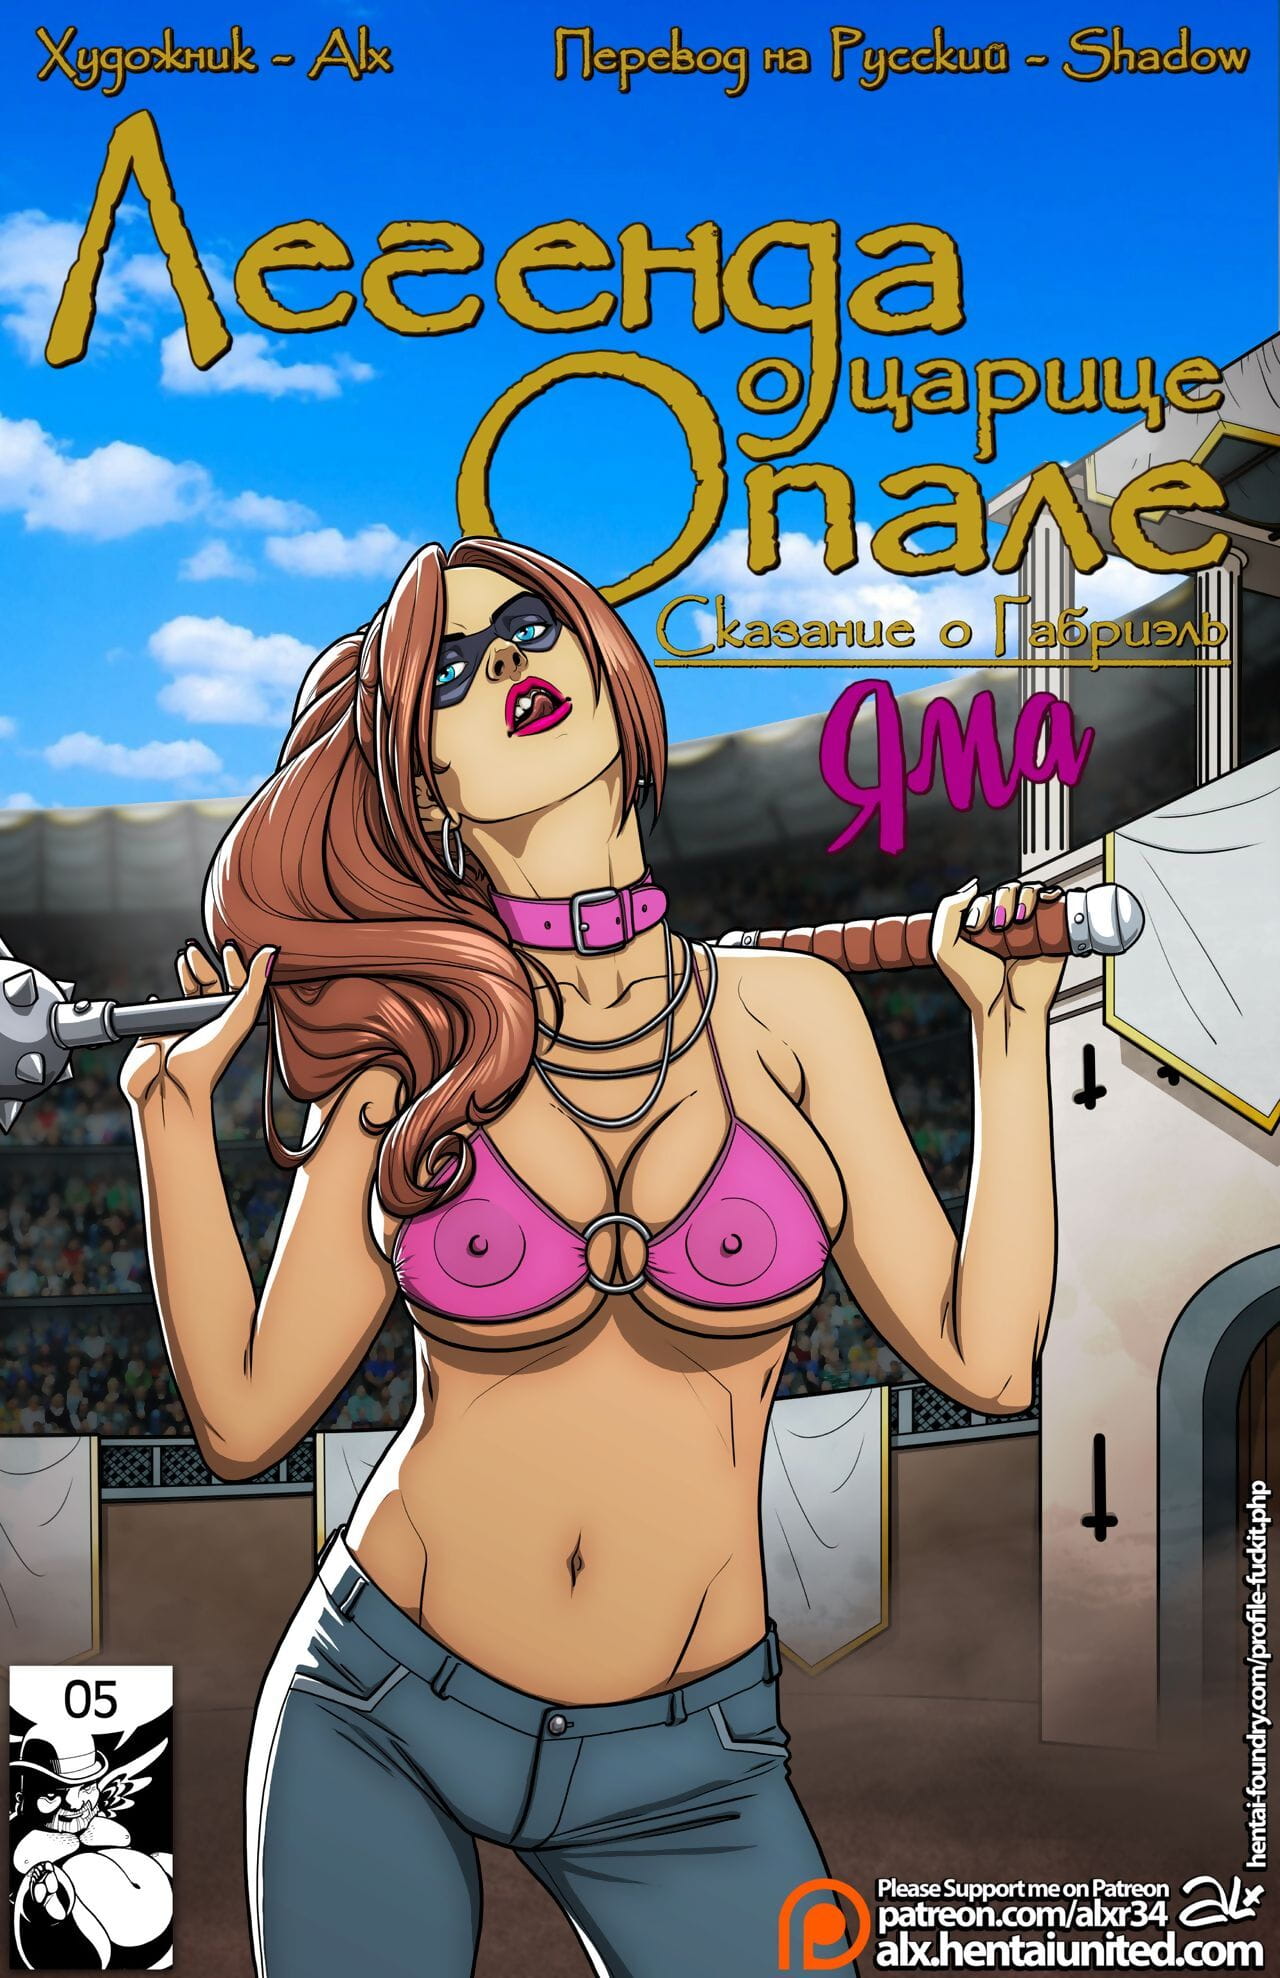 Legend of Queen Opala: Tales of Gabrielle - The Pit - ??????? ? ?????? ?????: ???????? ? ???????? - ??? page 1